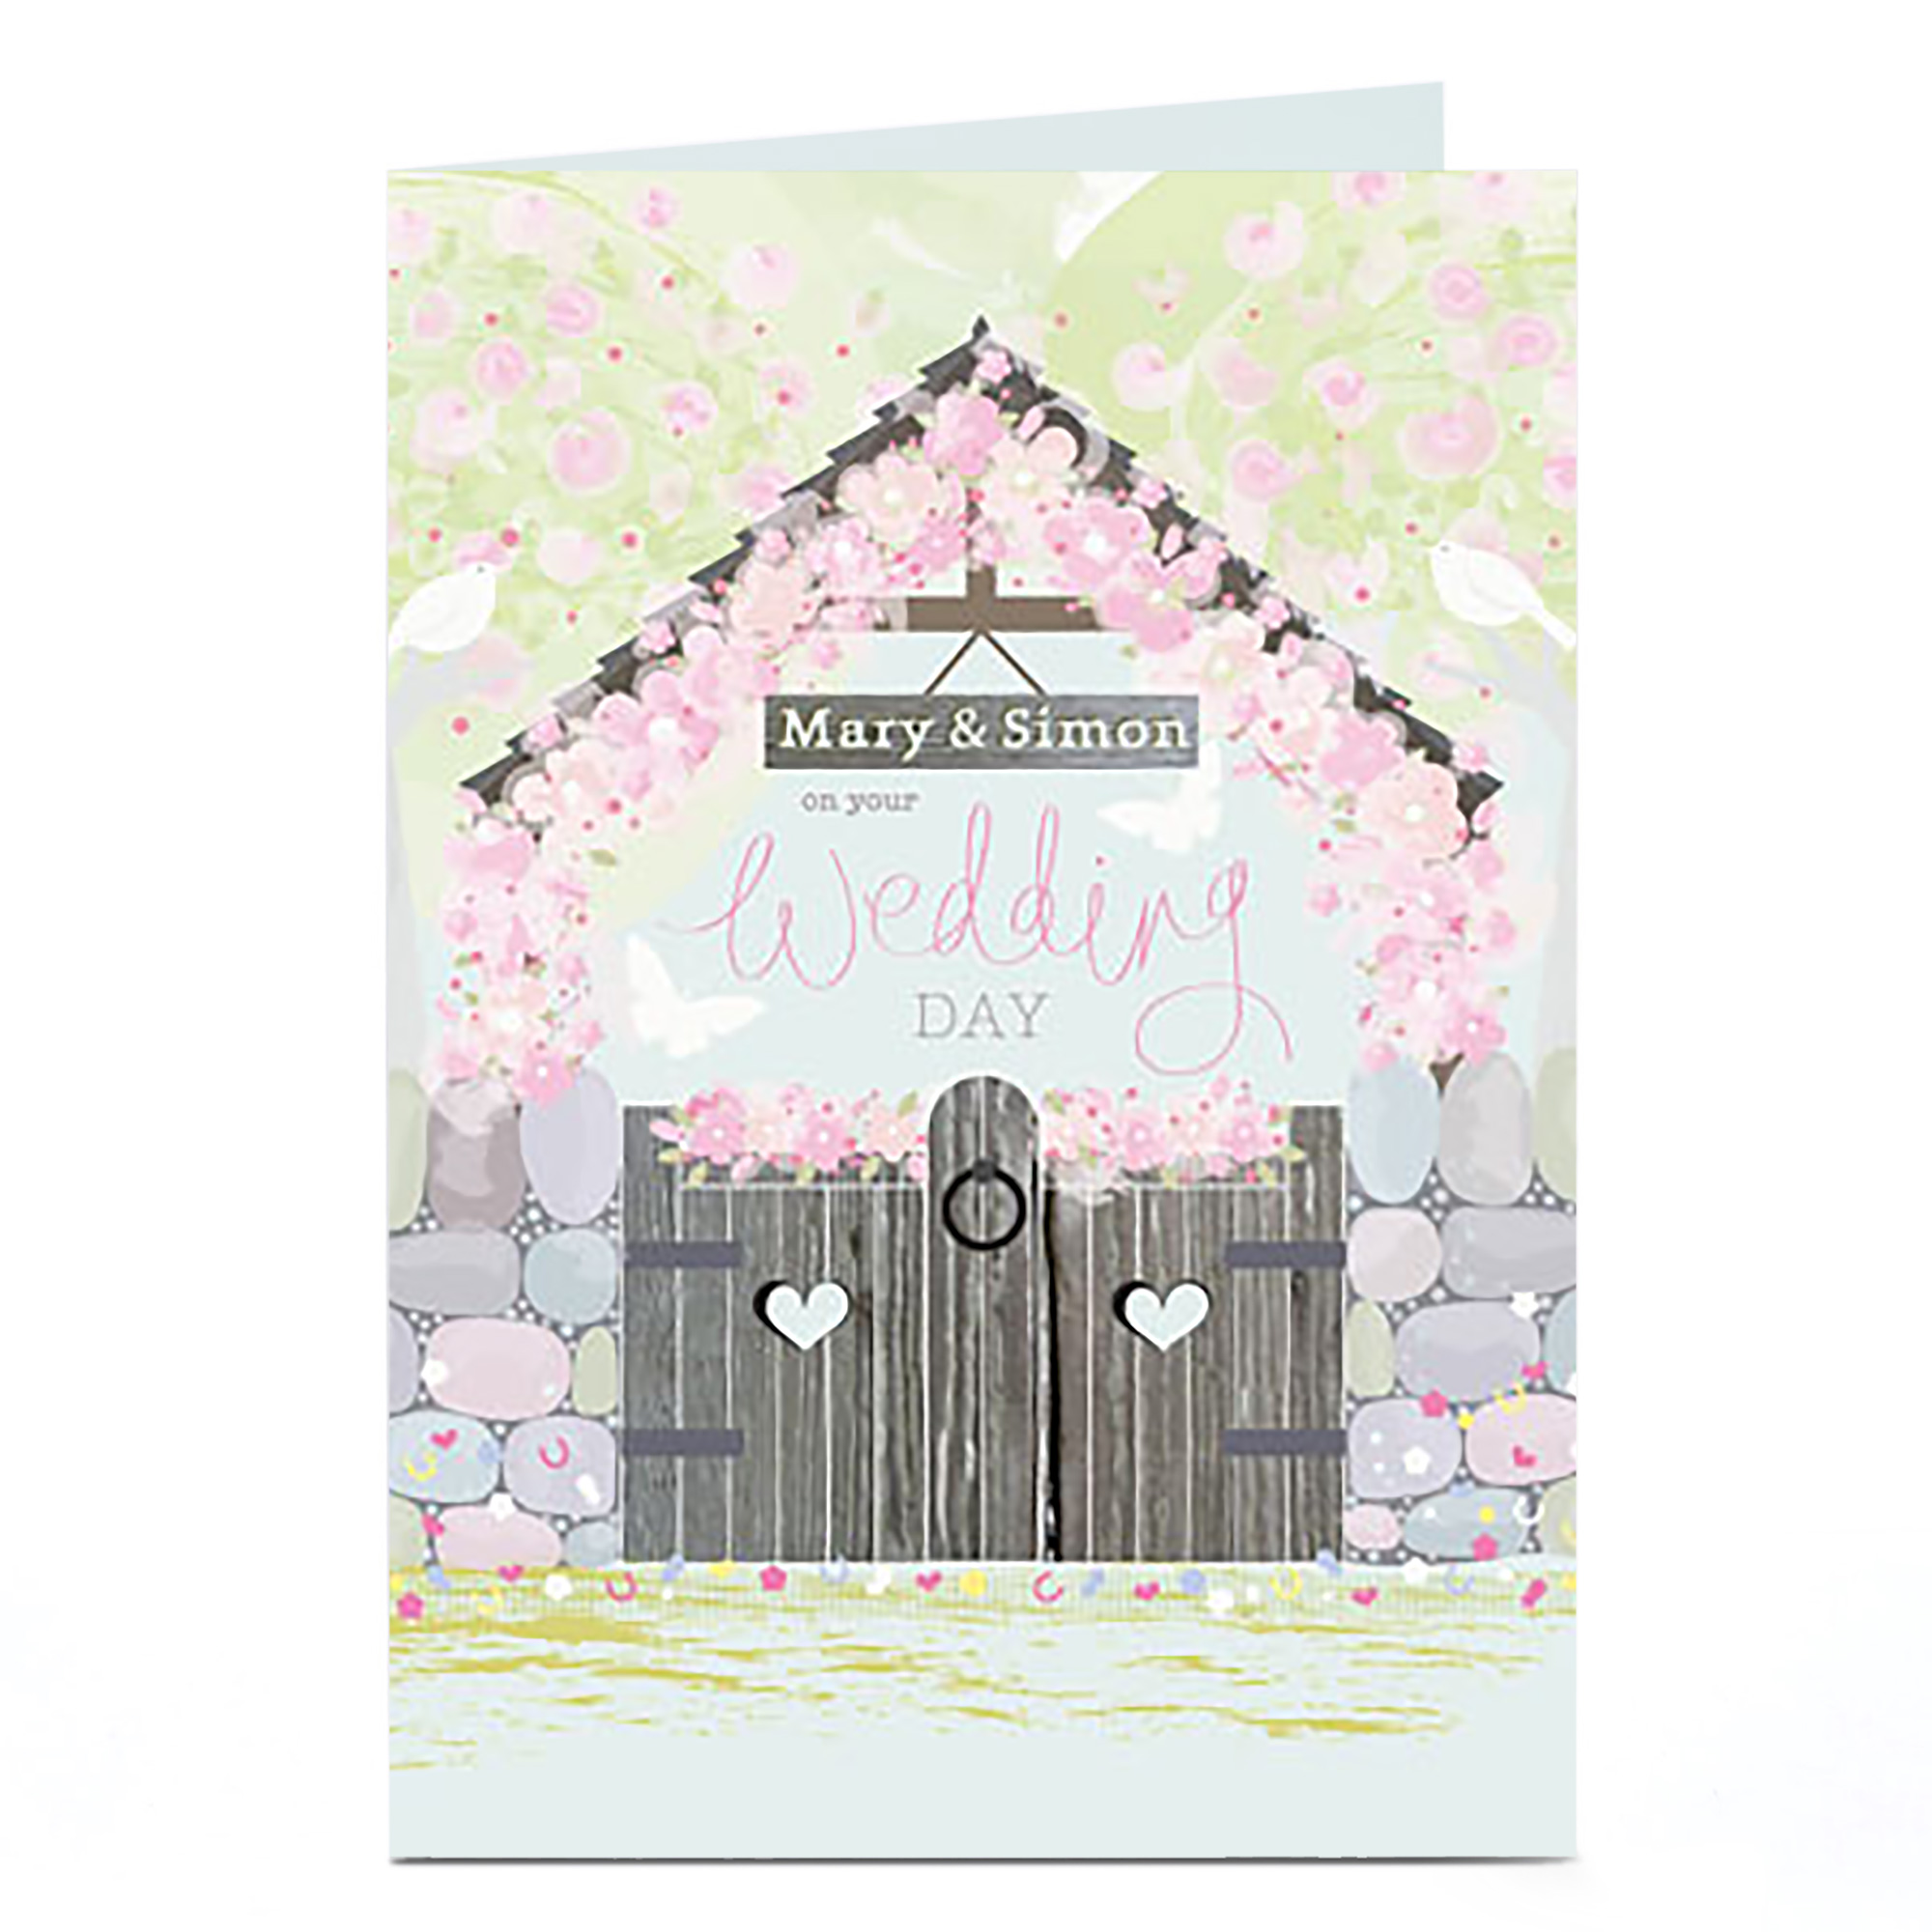 Personalised Wedding Day Card - Church Front